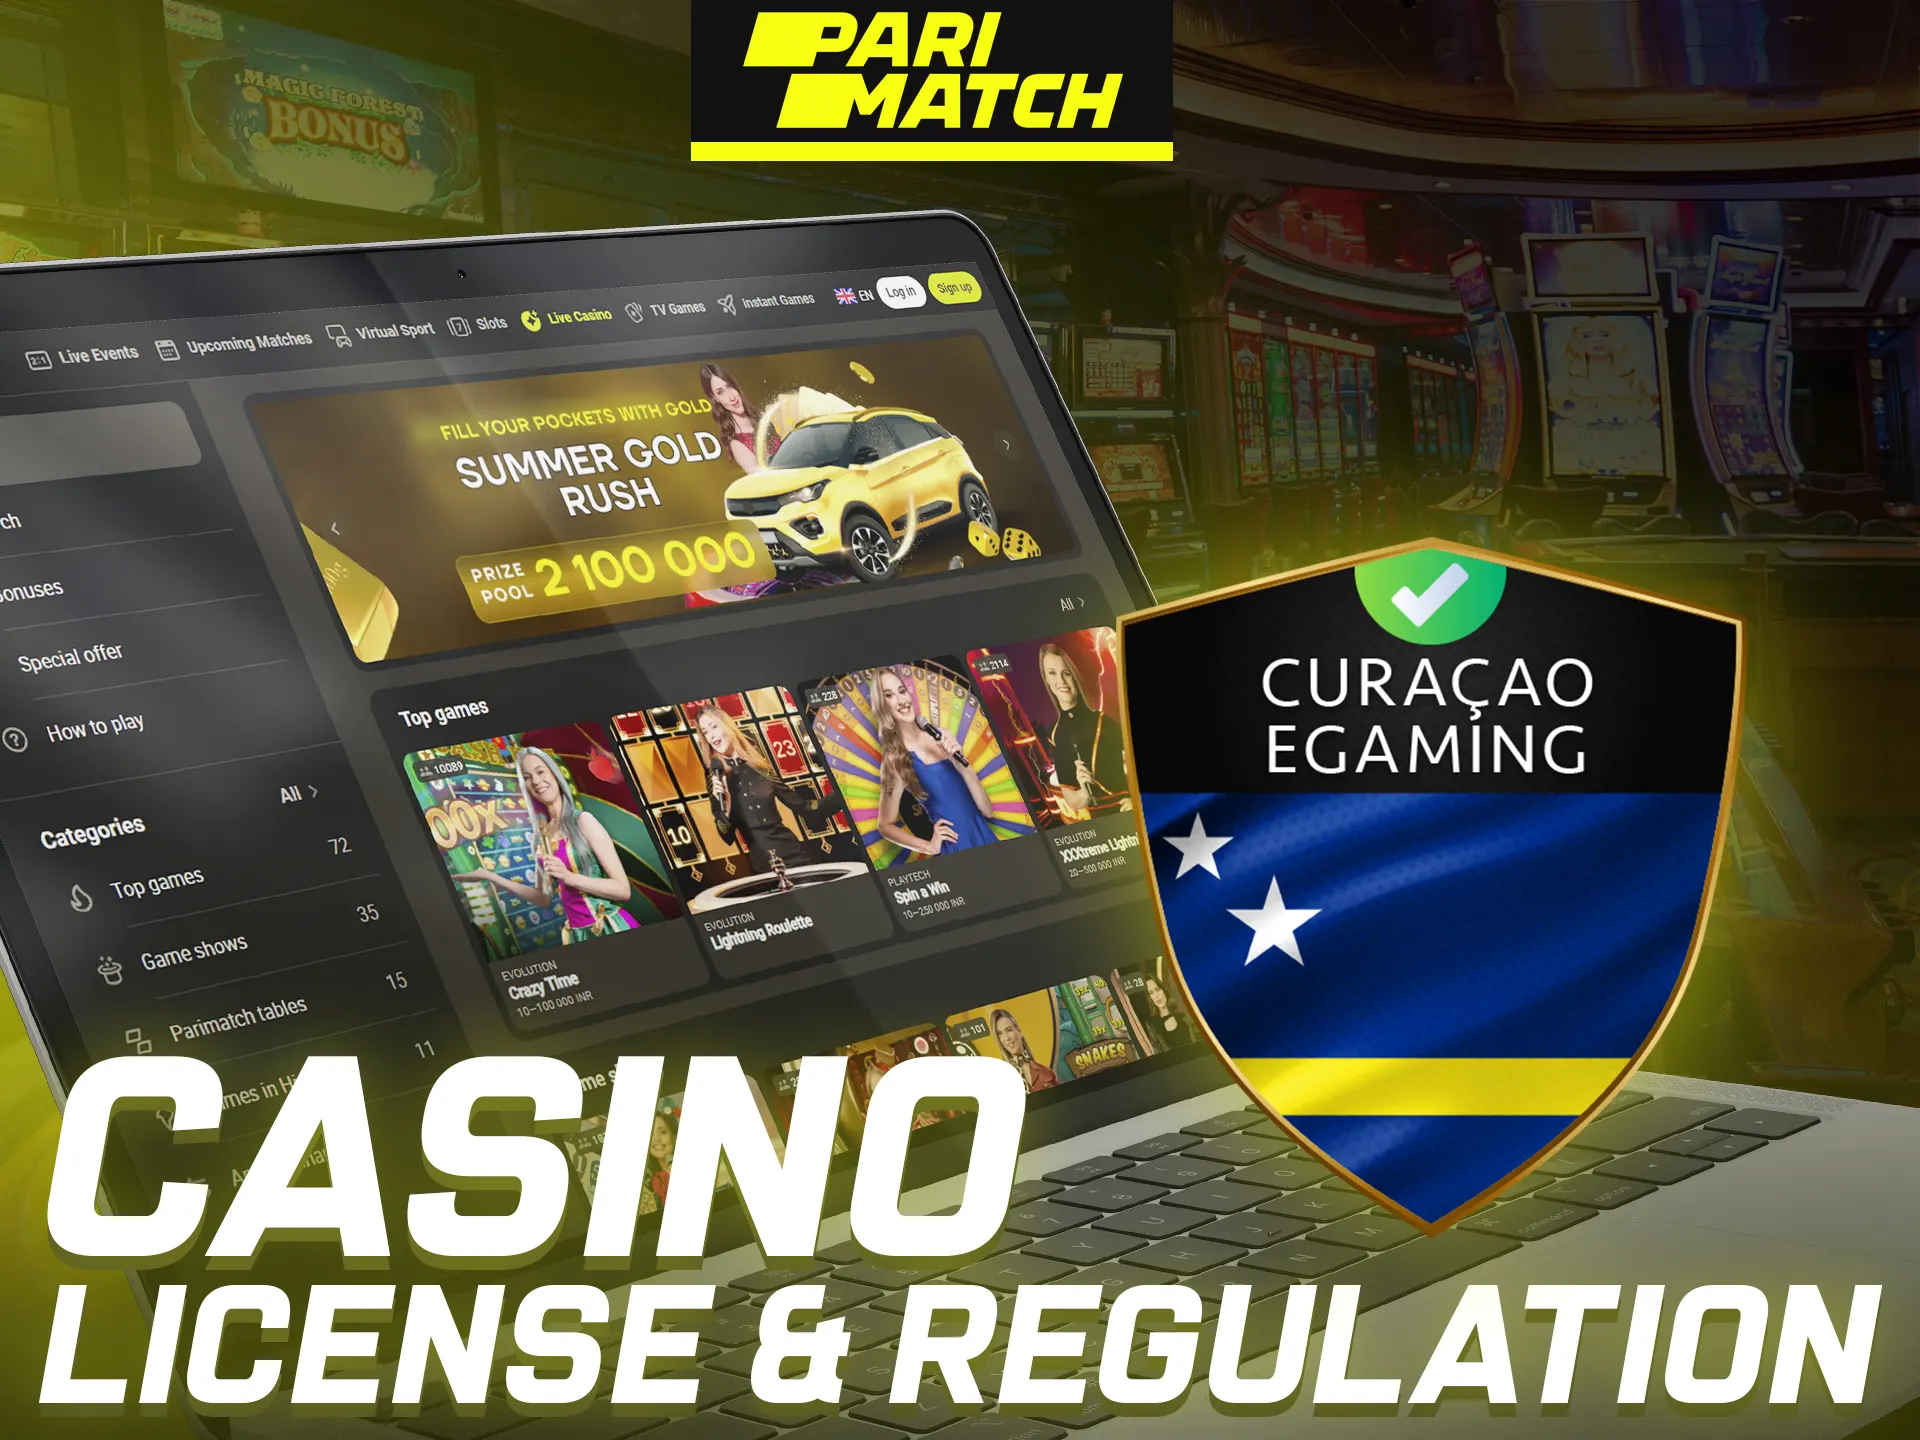 The casino offers tools and information to help players take control of their playing time.